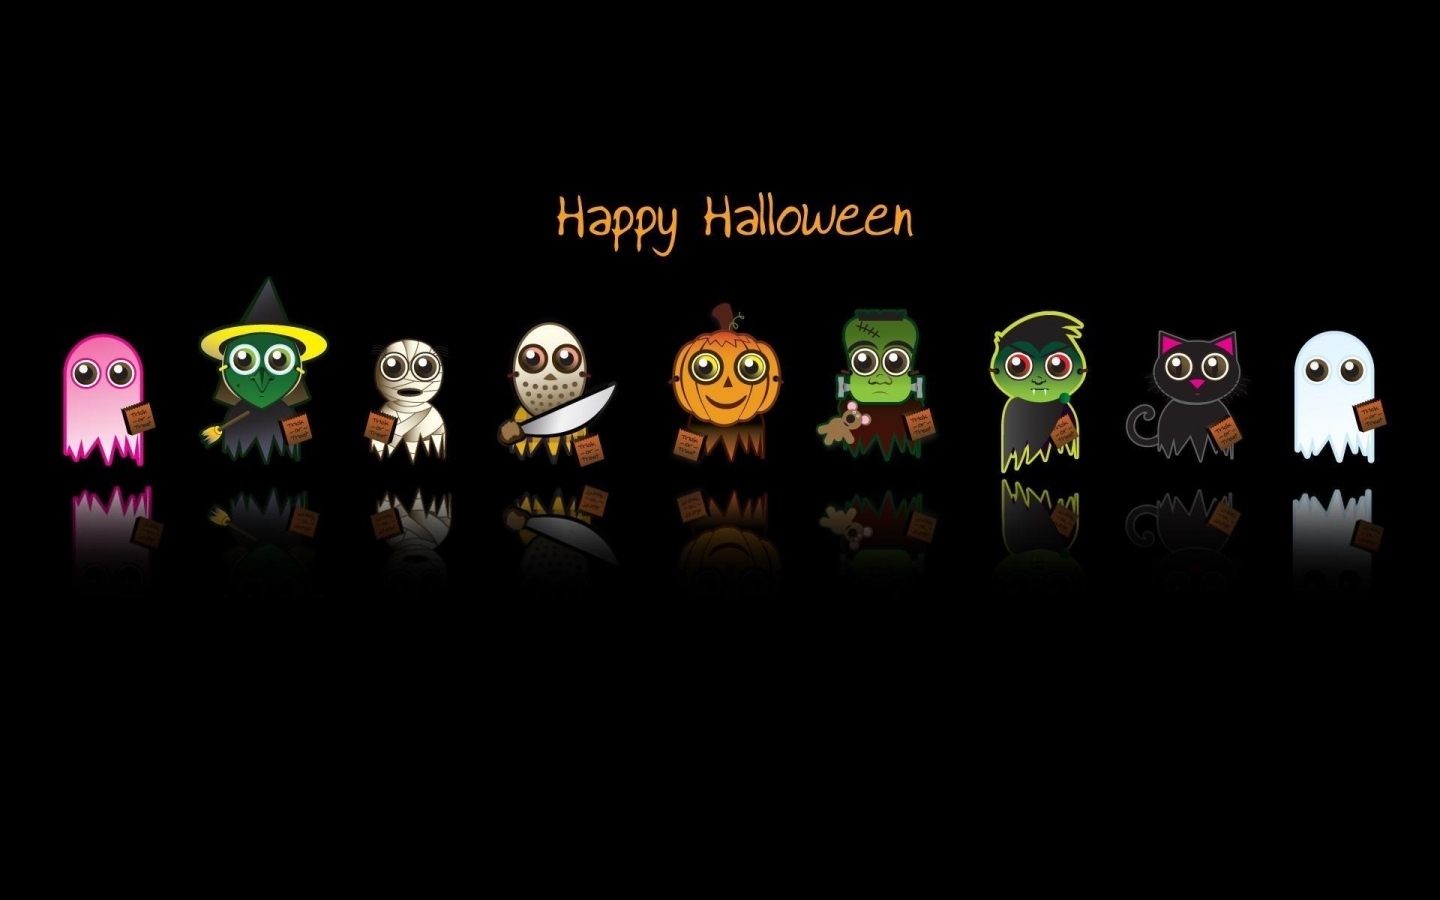 Happy Halloween Characters for 1440 x 900 widescreen resolution